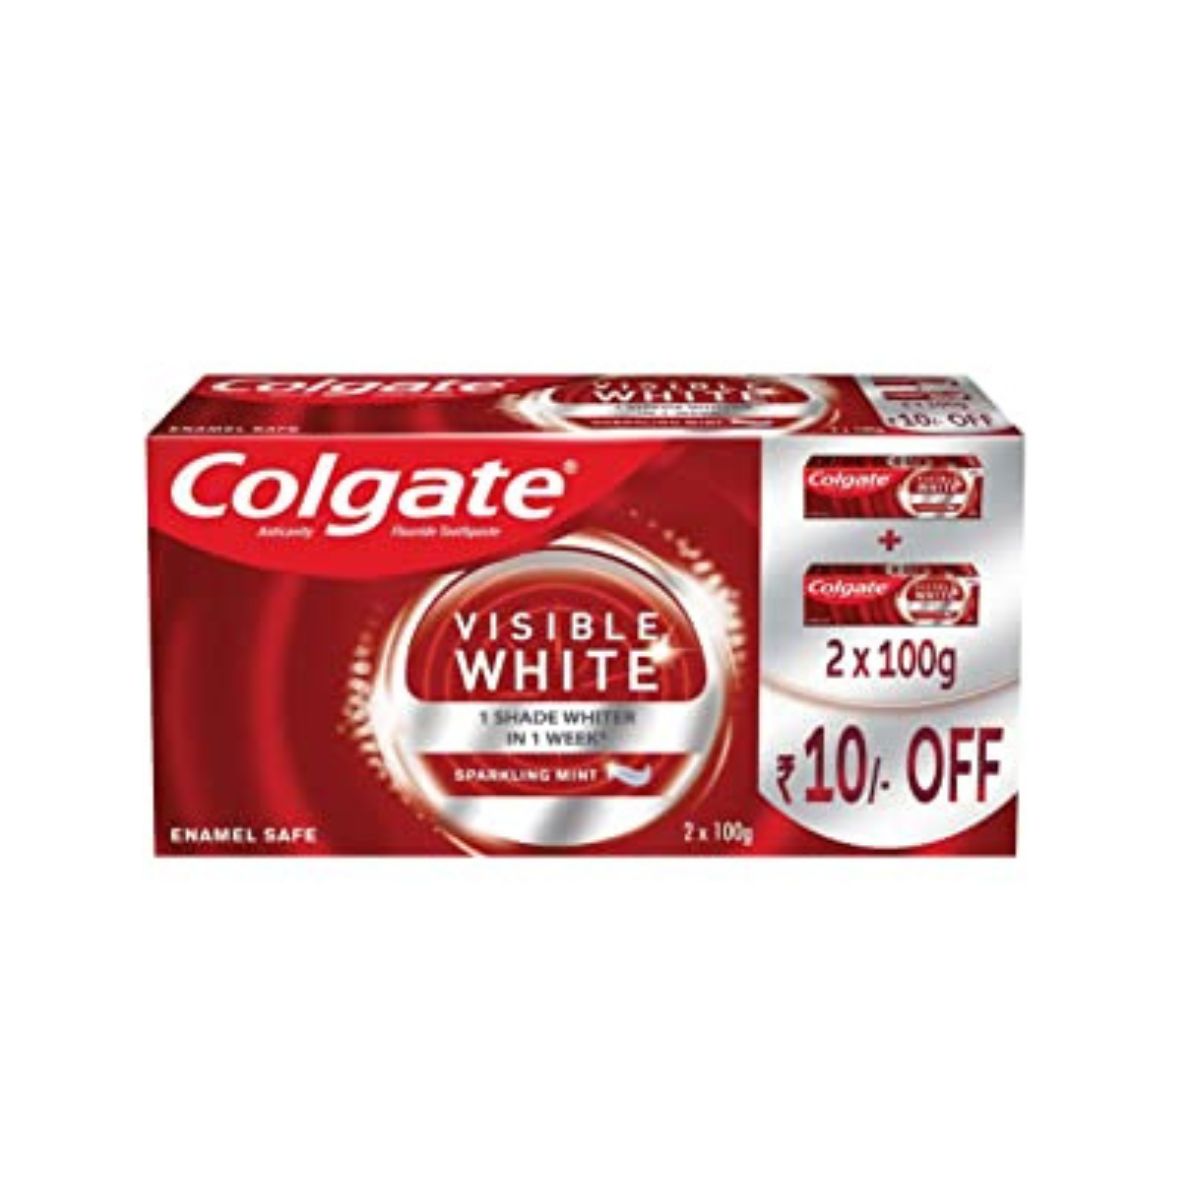 Colgate Visible White - 1 Shade Whiter In 1 Week - Sparkling Mint - 2 X 100g